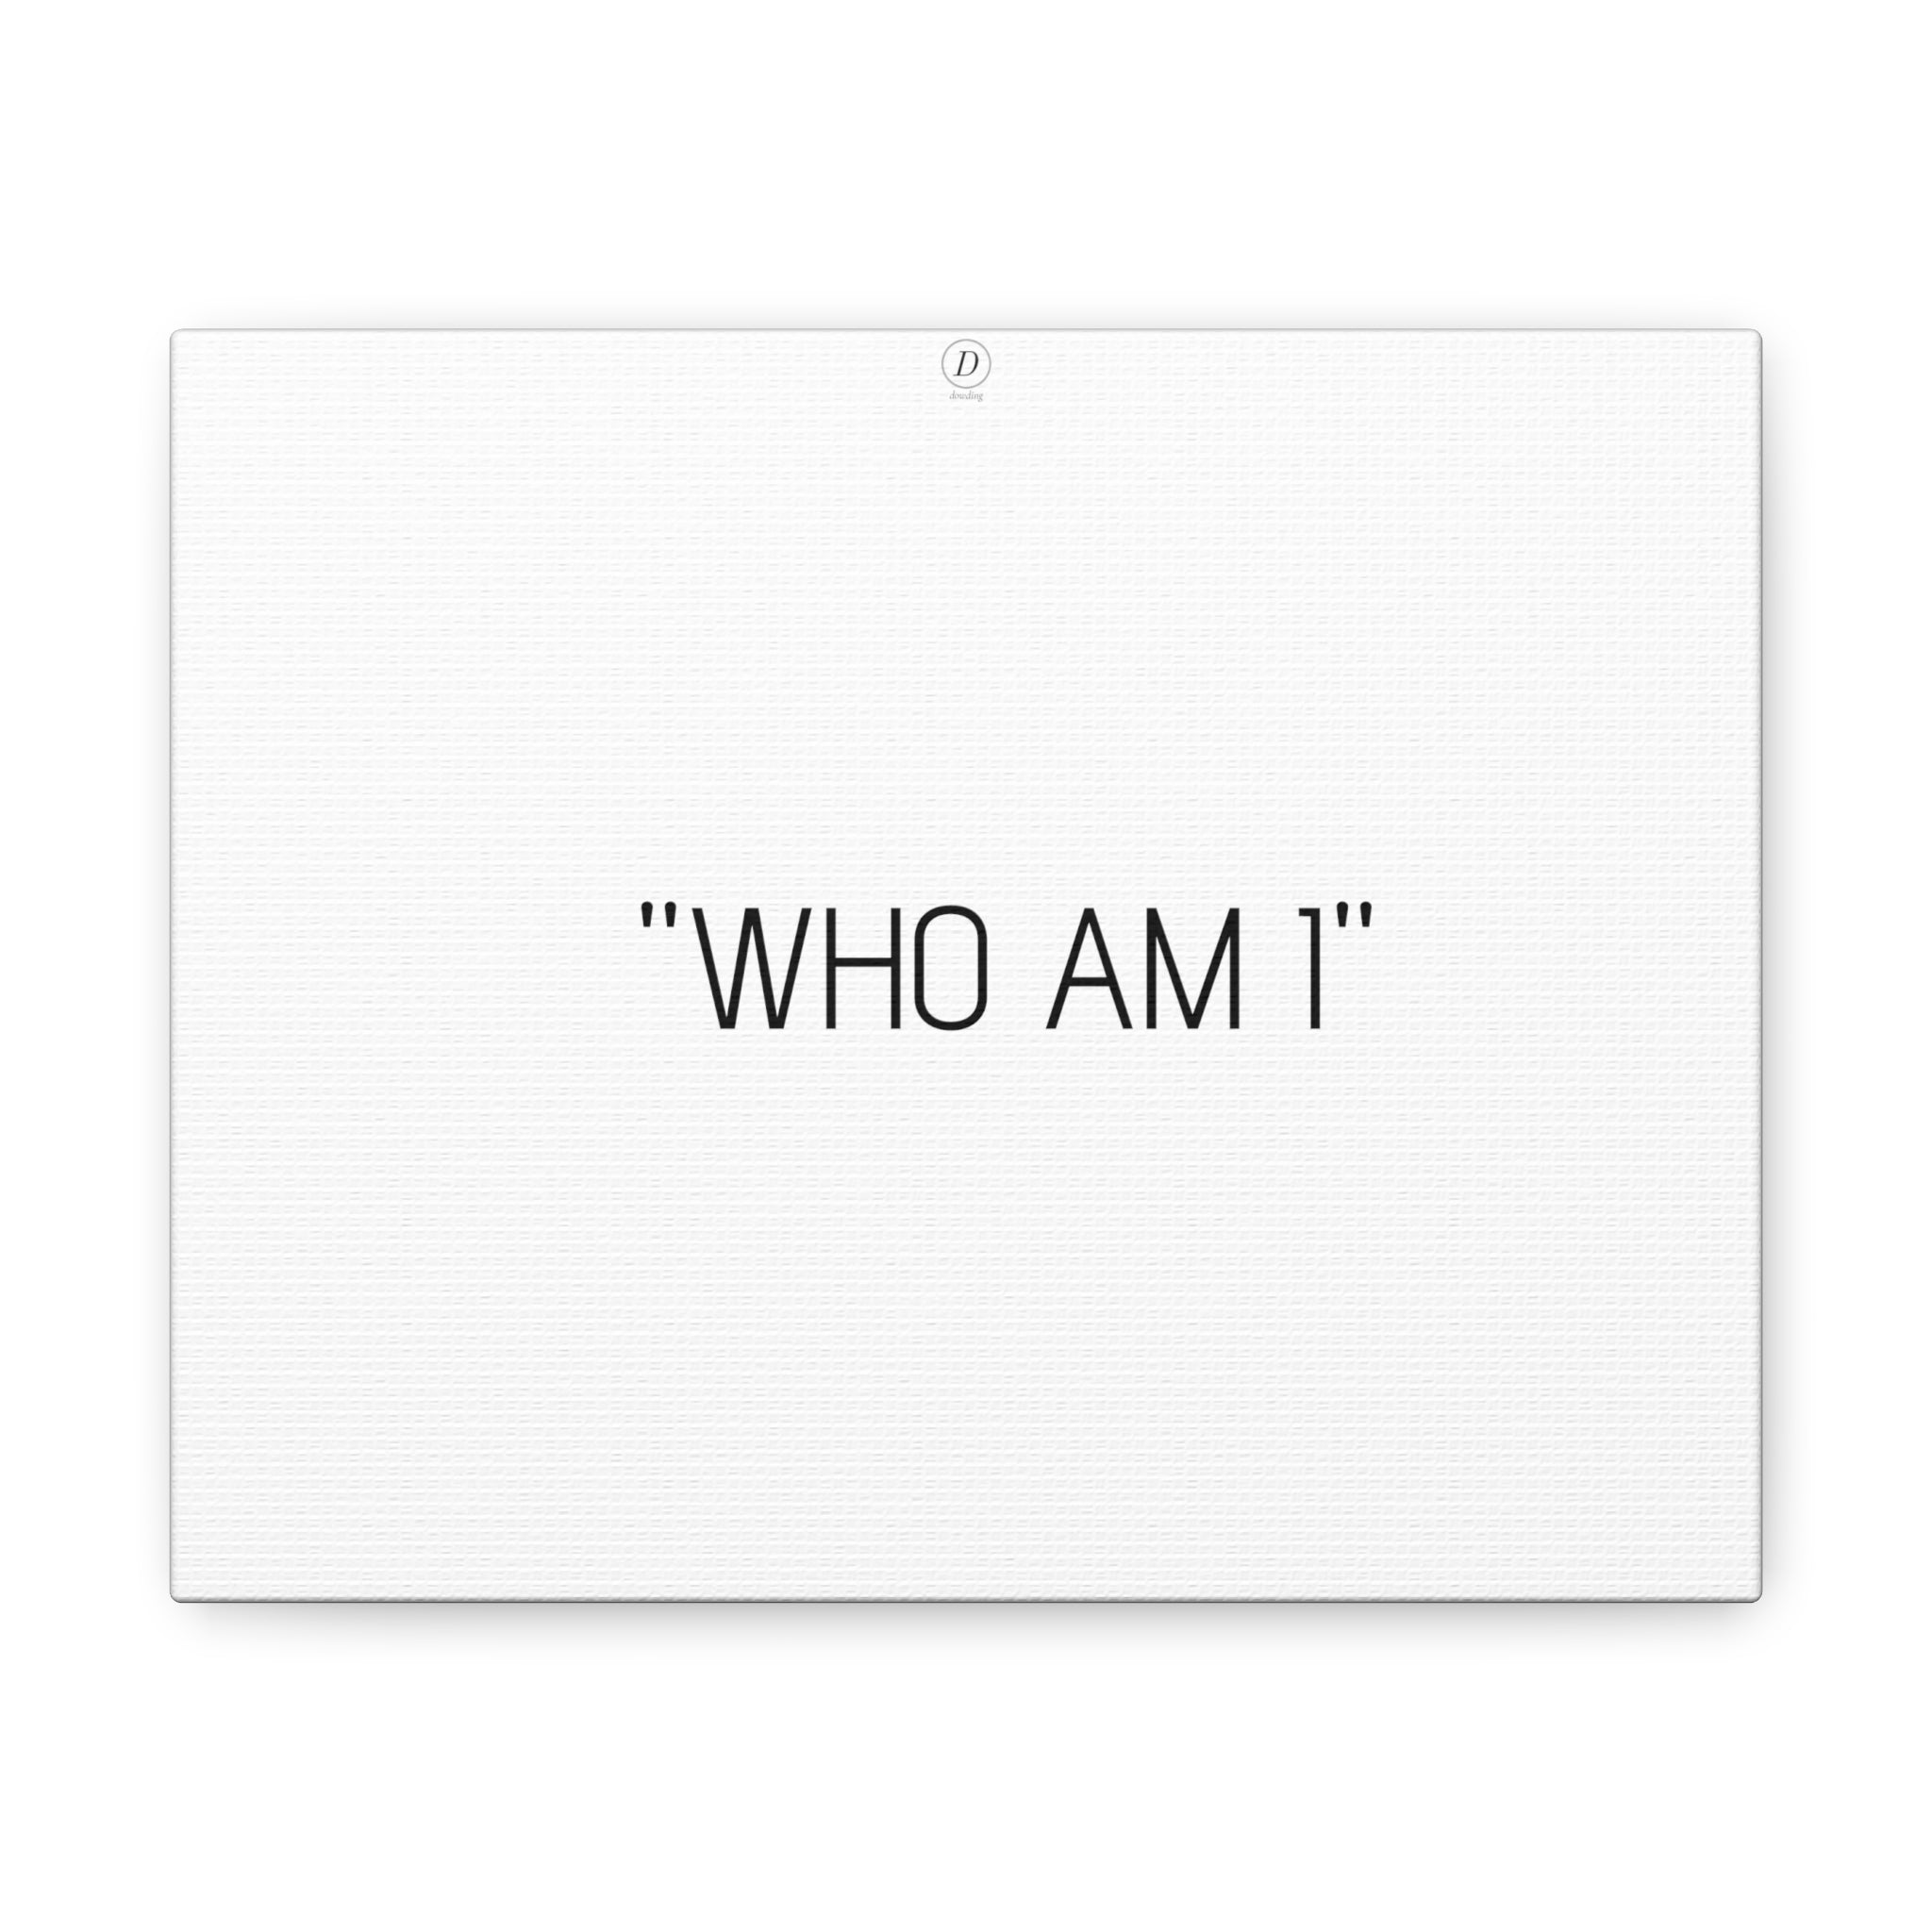 "WHO AM I" Motivational Canvas Gallery Wraps